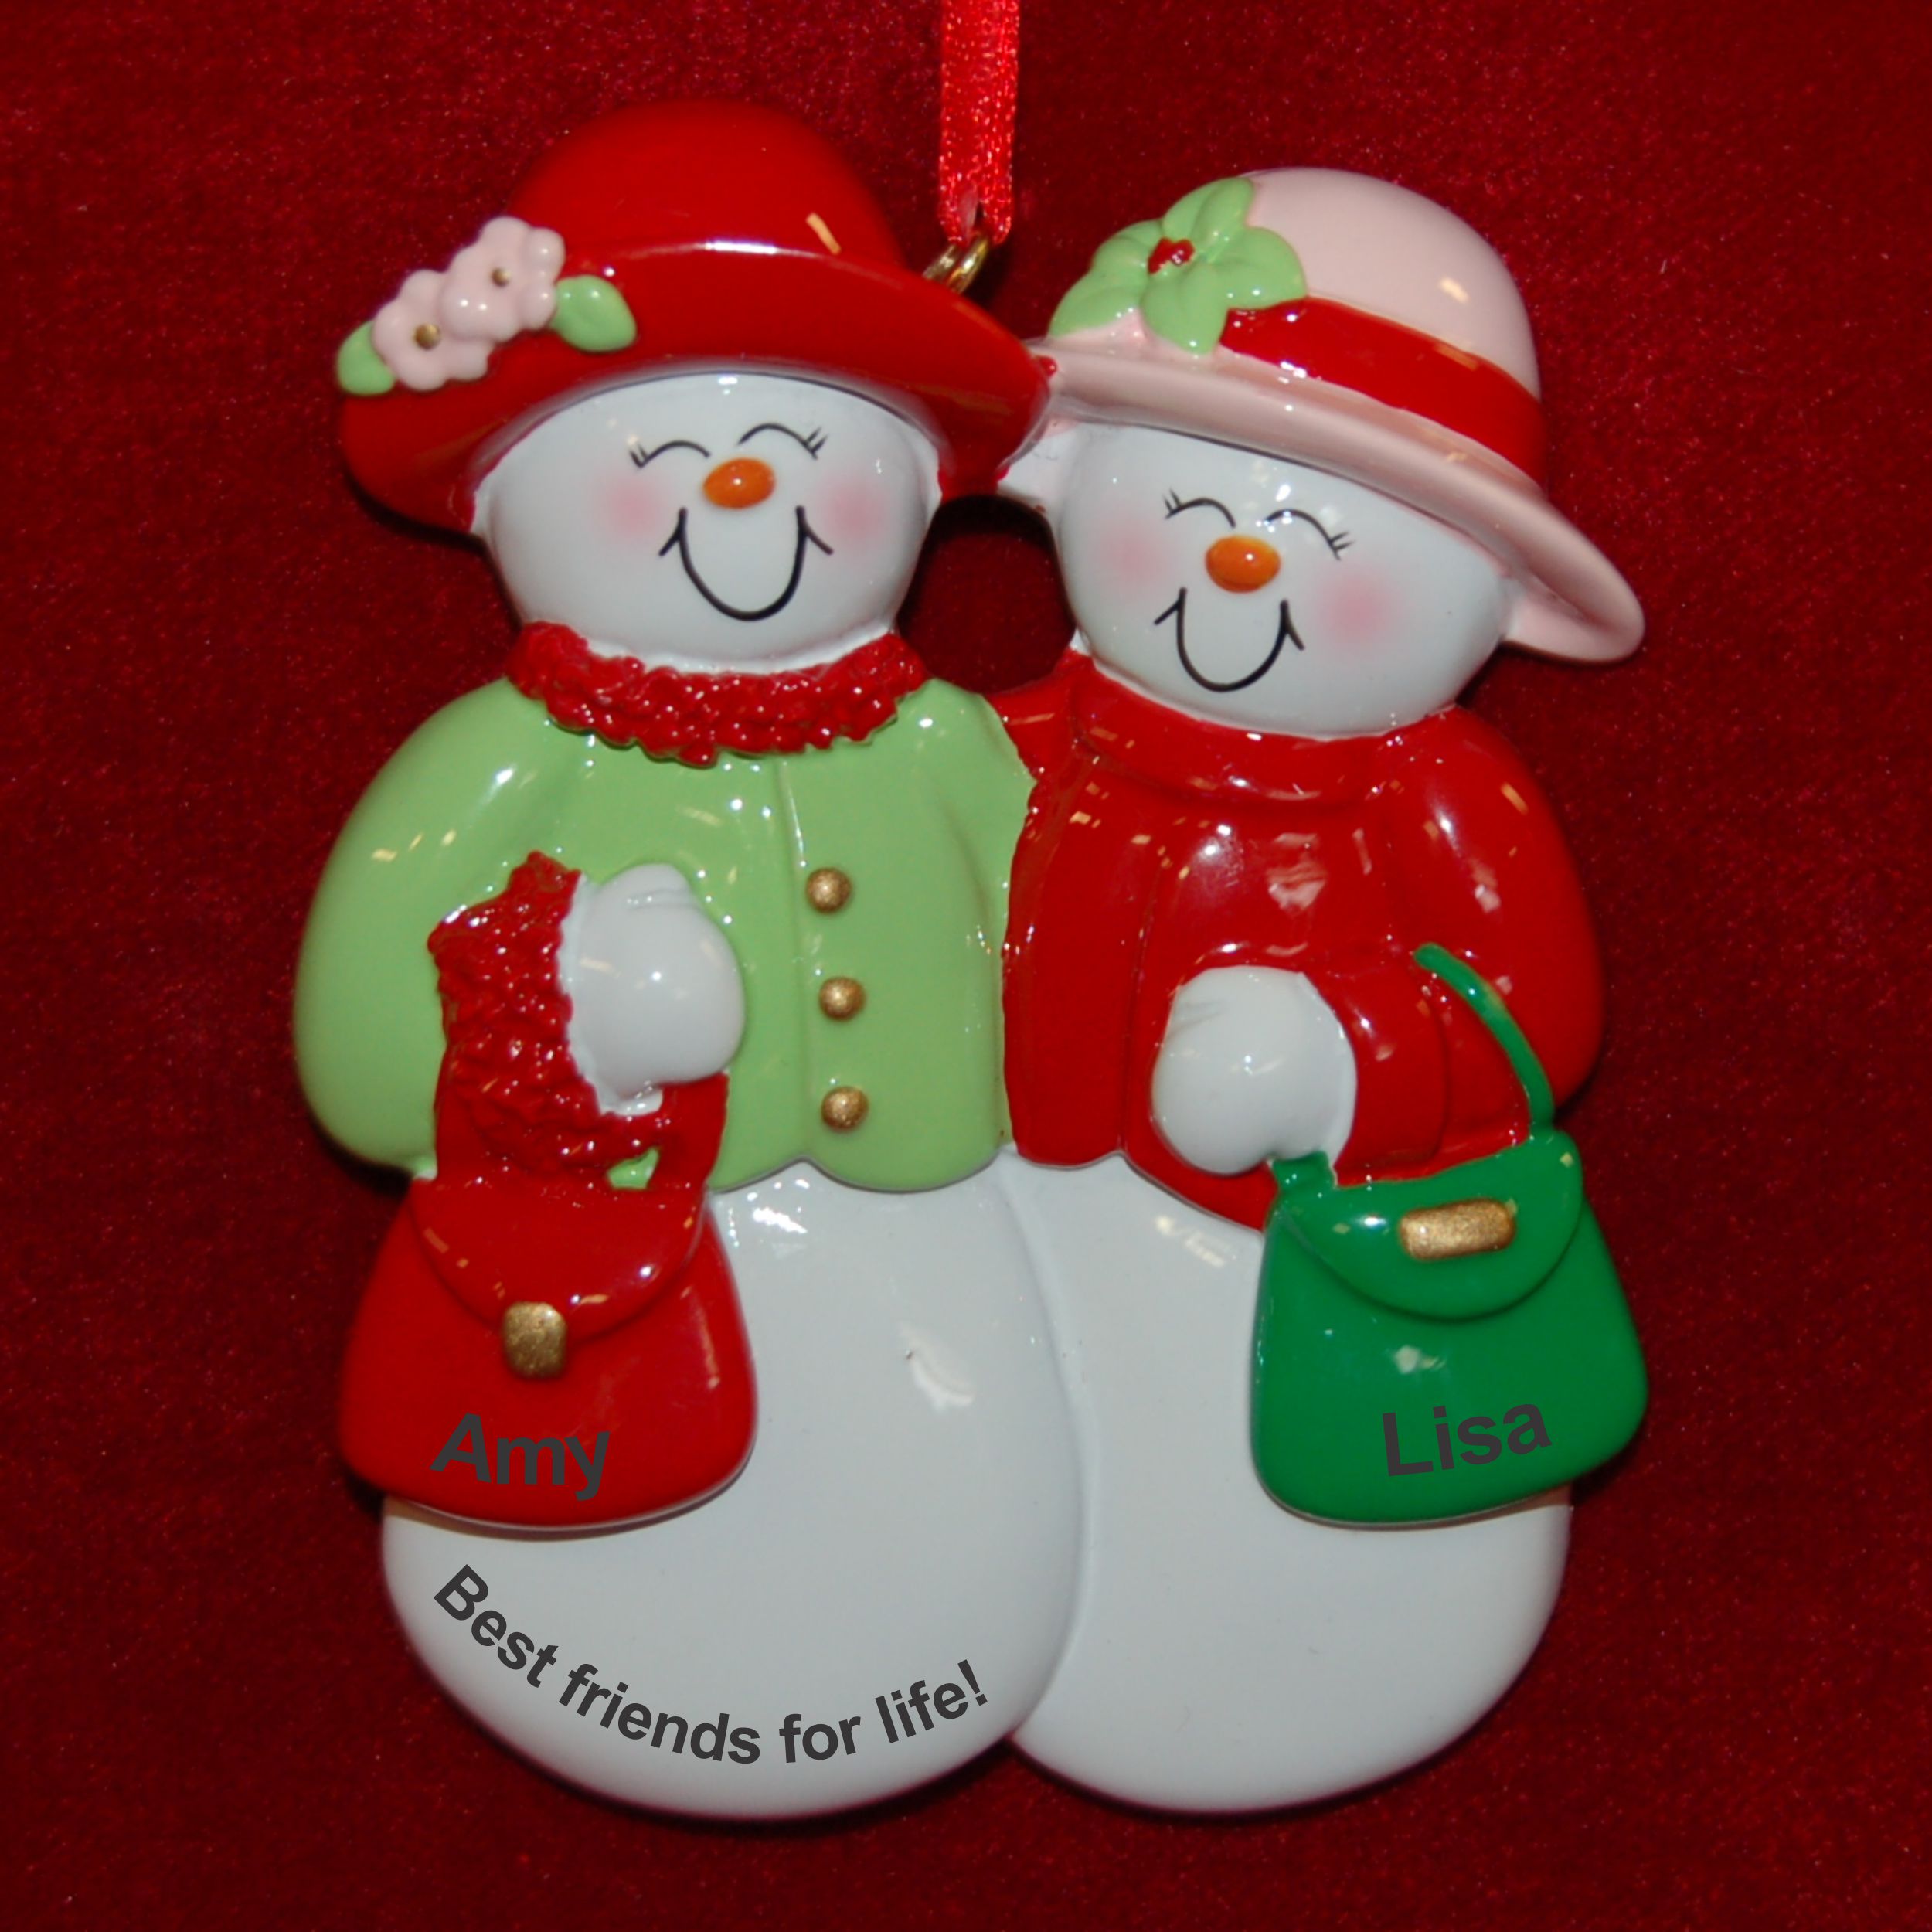 Friendship Christmas Ornament Snowy Besties Personalized by RussellRhodes.com